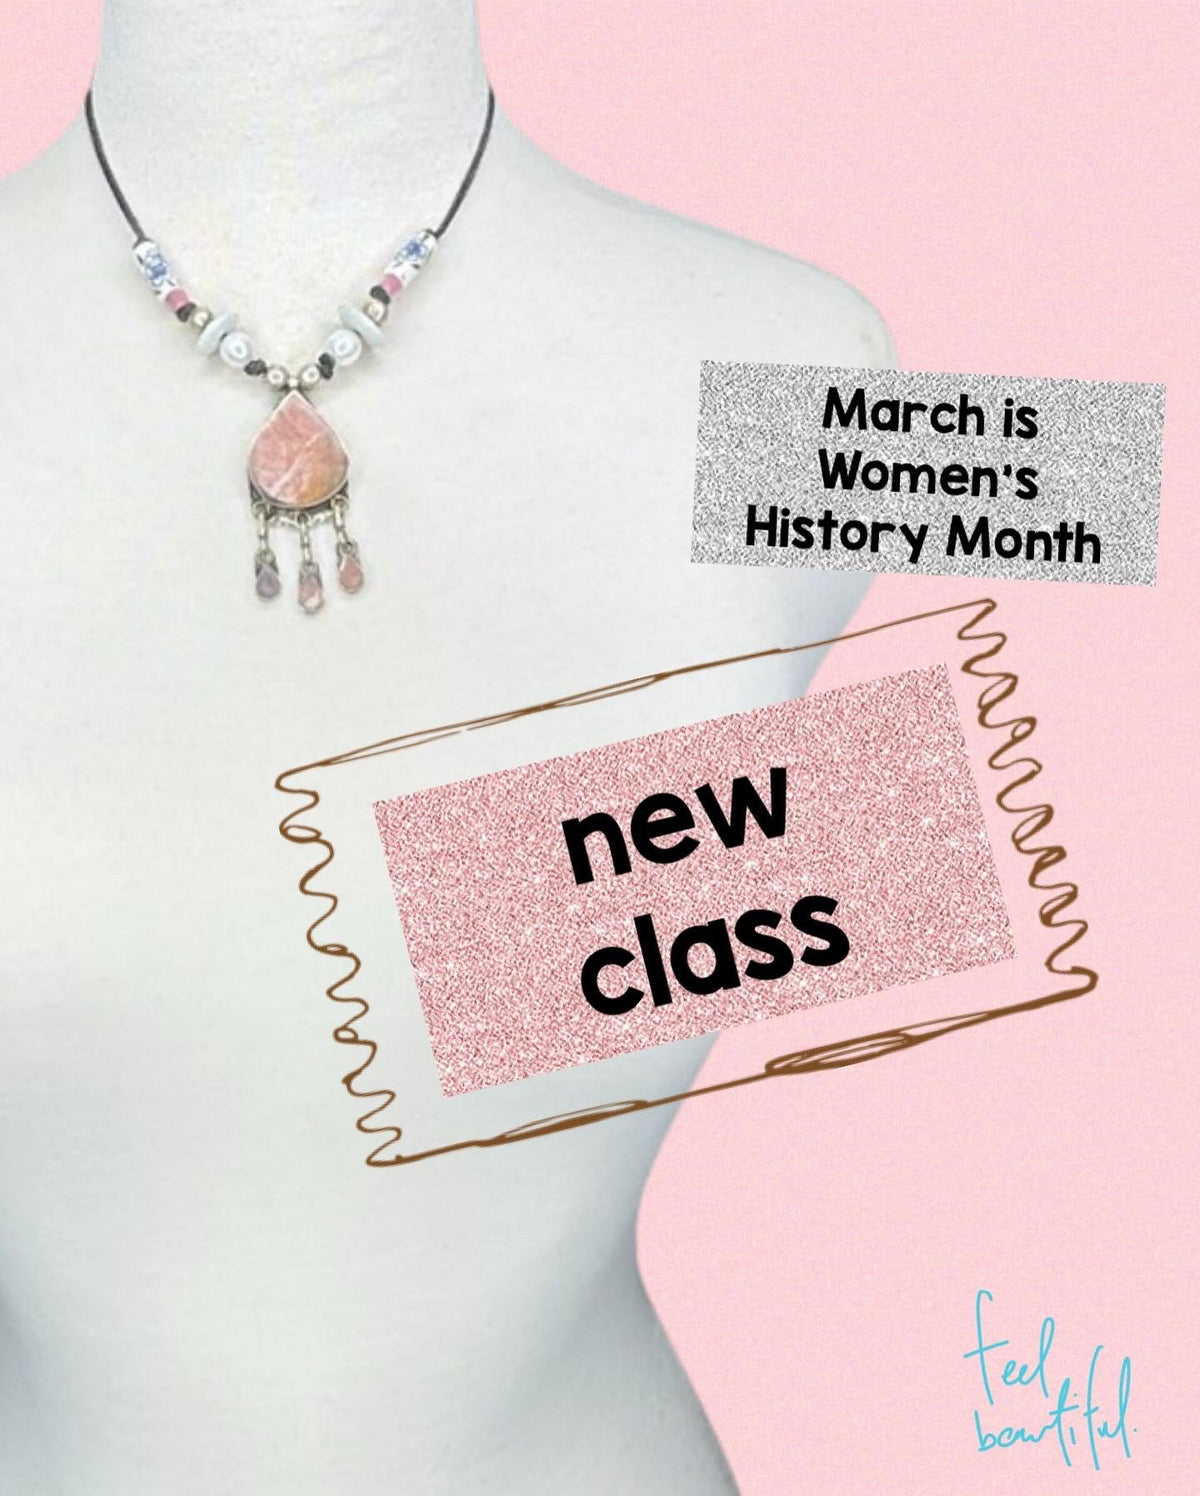 TICKETS: Artist Talk/create jewels together pink opal, pearl, and African silver necklace/bracelet